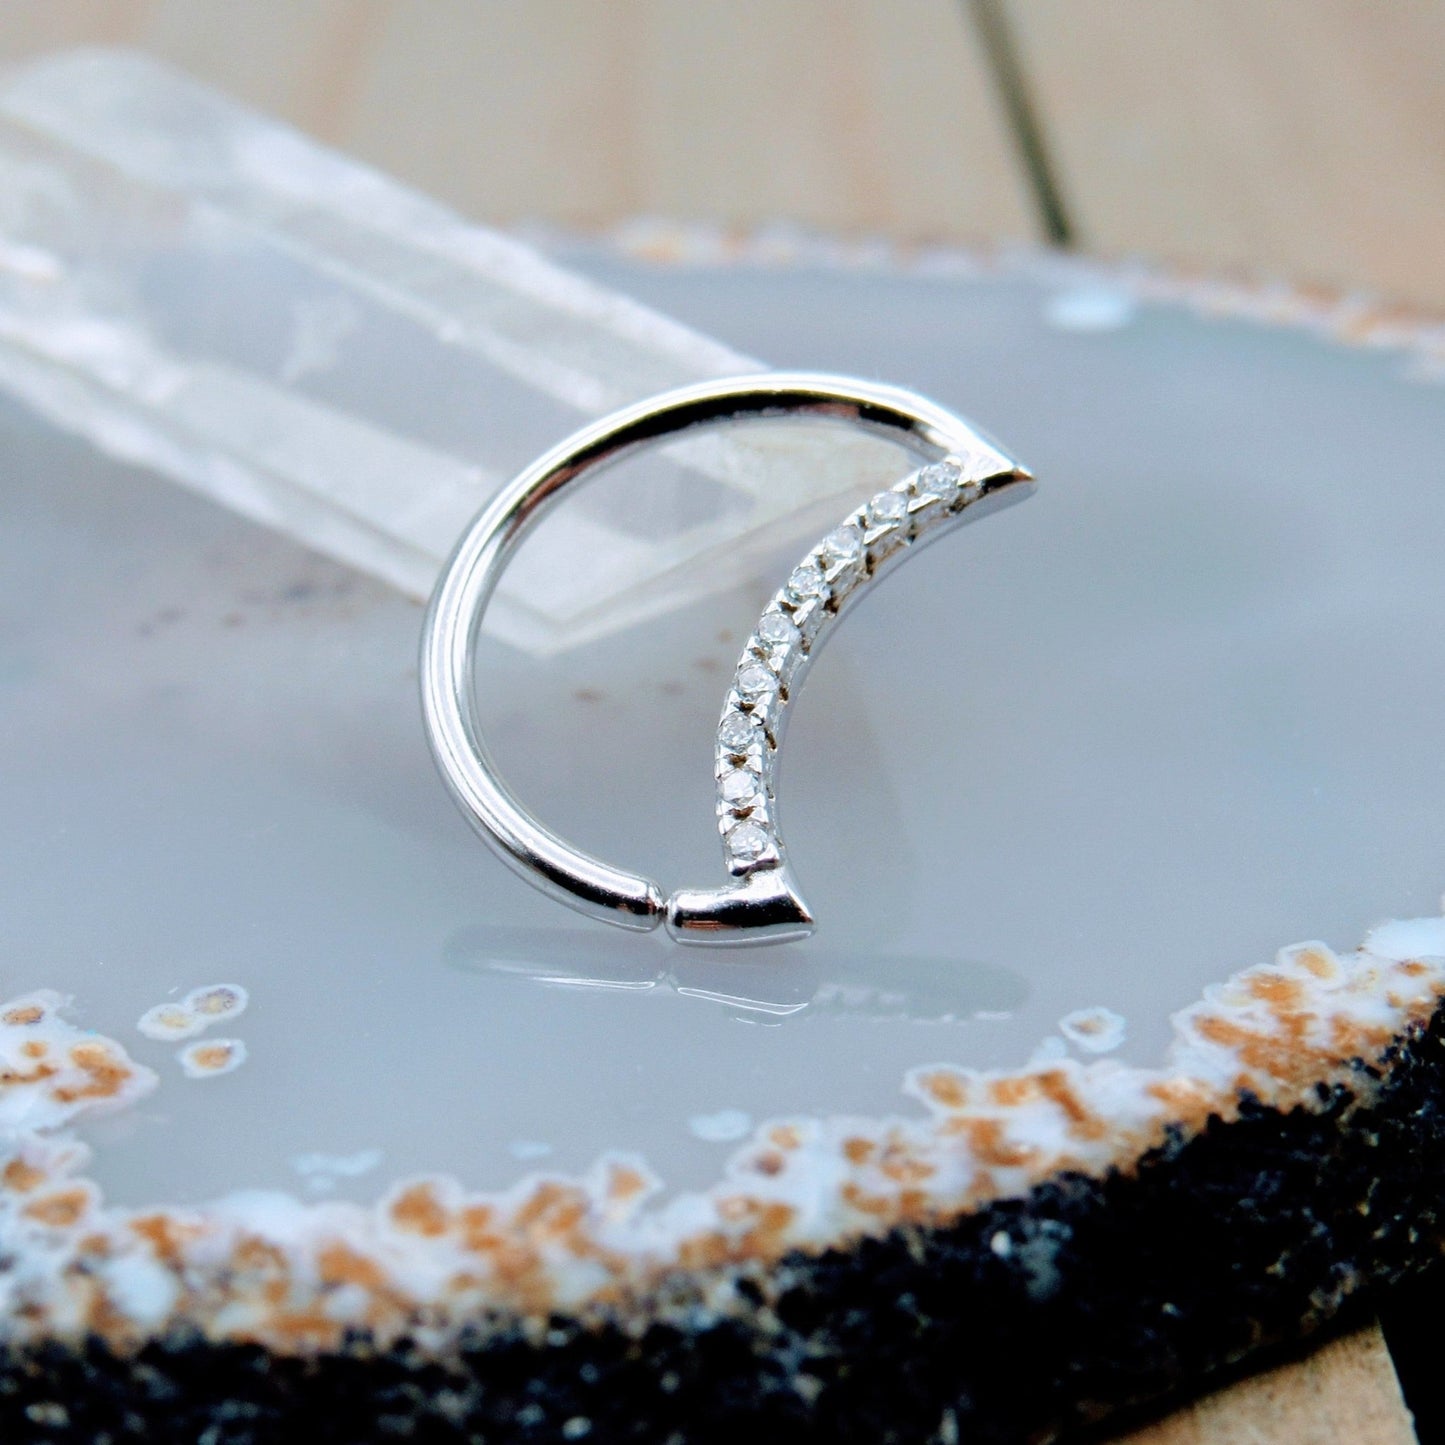 Crescent moon crystal gemstone silver easy bend seam ring daith rook helix piercing hoop .925 sterling silver - Siren Body Jewelry